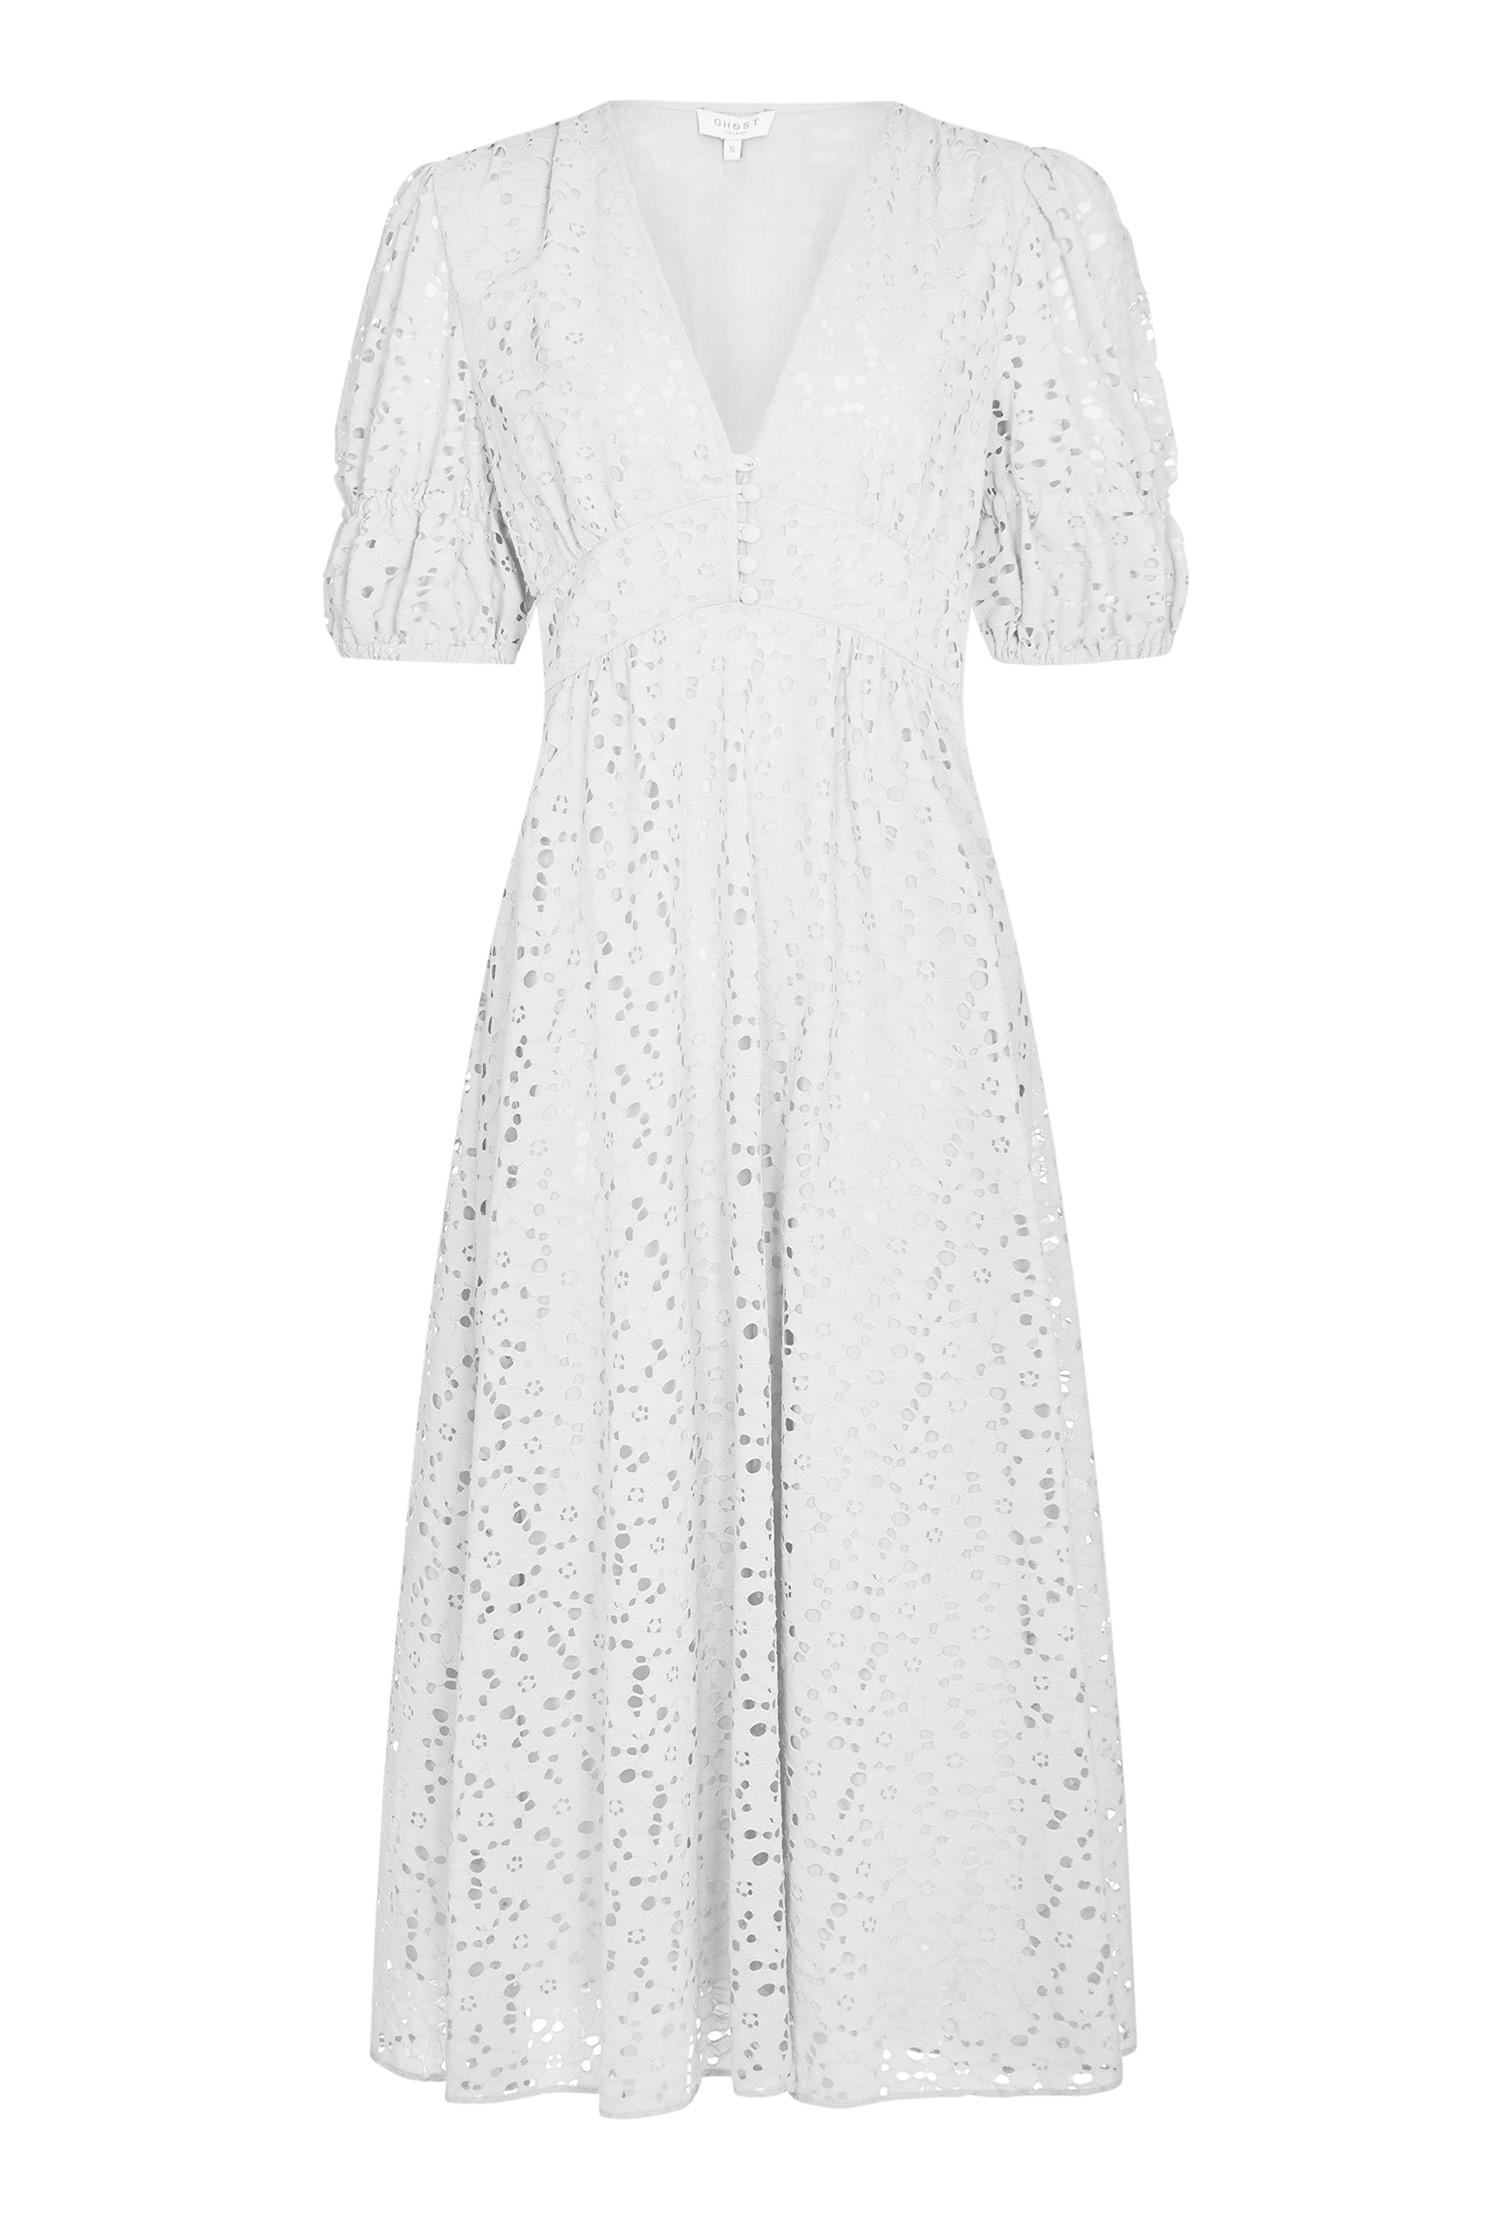 Cotton Midi Dress with Short Sleeves in White Print | Ghost London